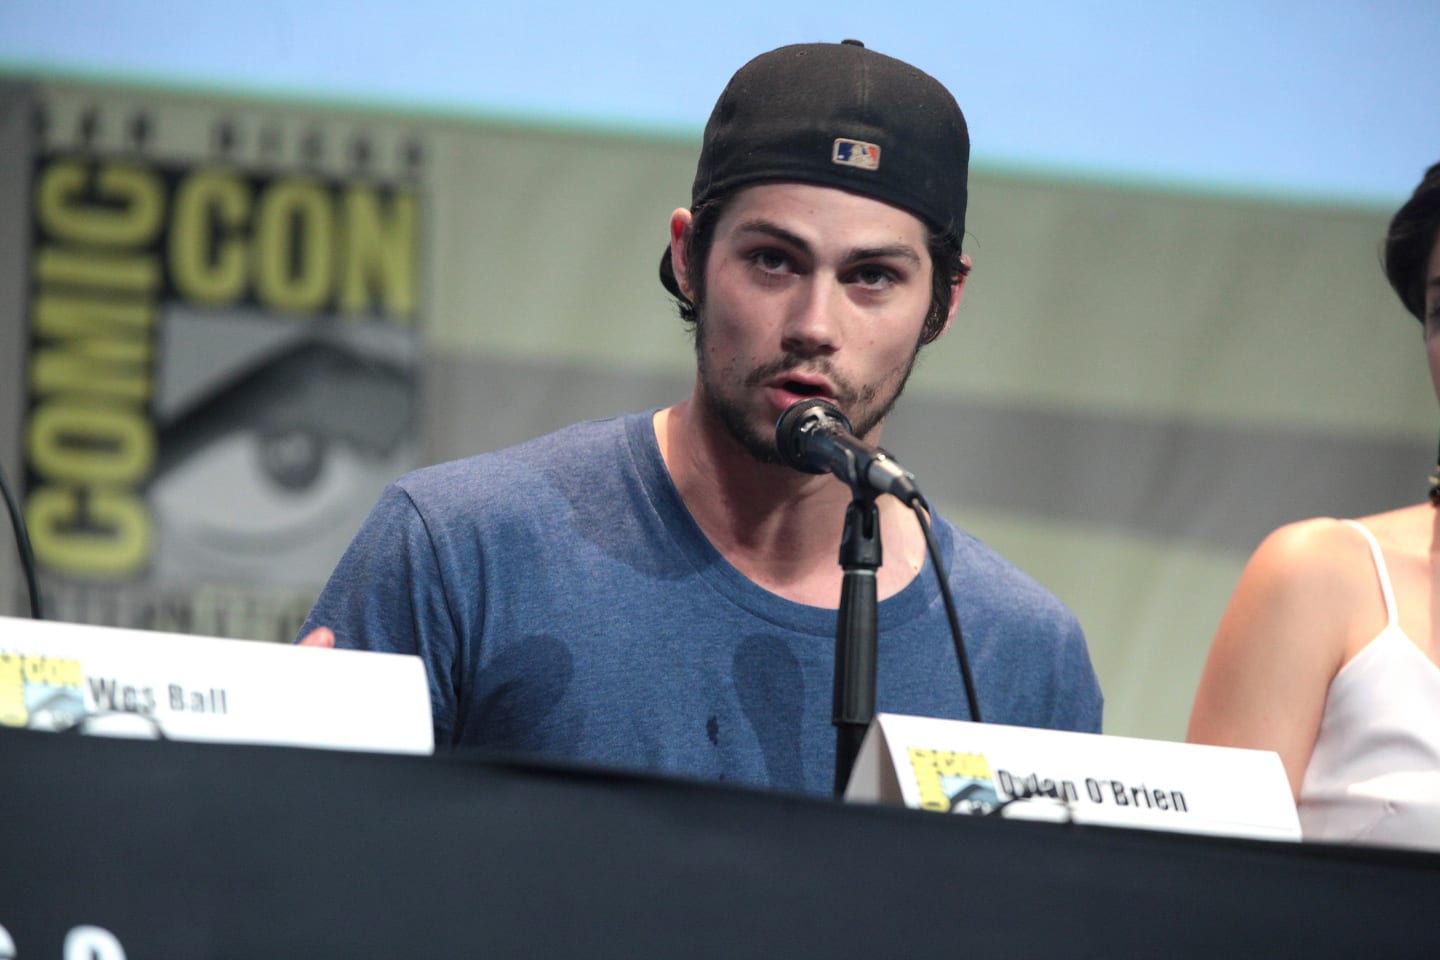 Dylan O'Brien attended the Comic Con conference for 'The Maze Runner' film